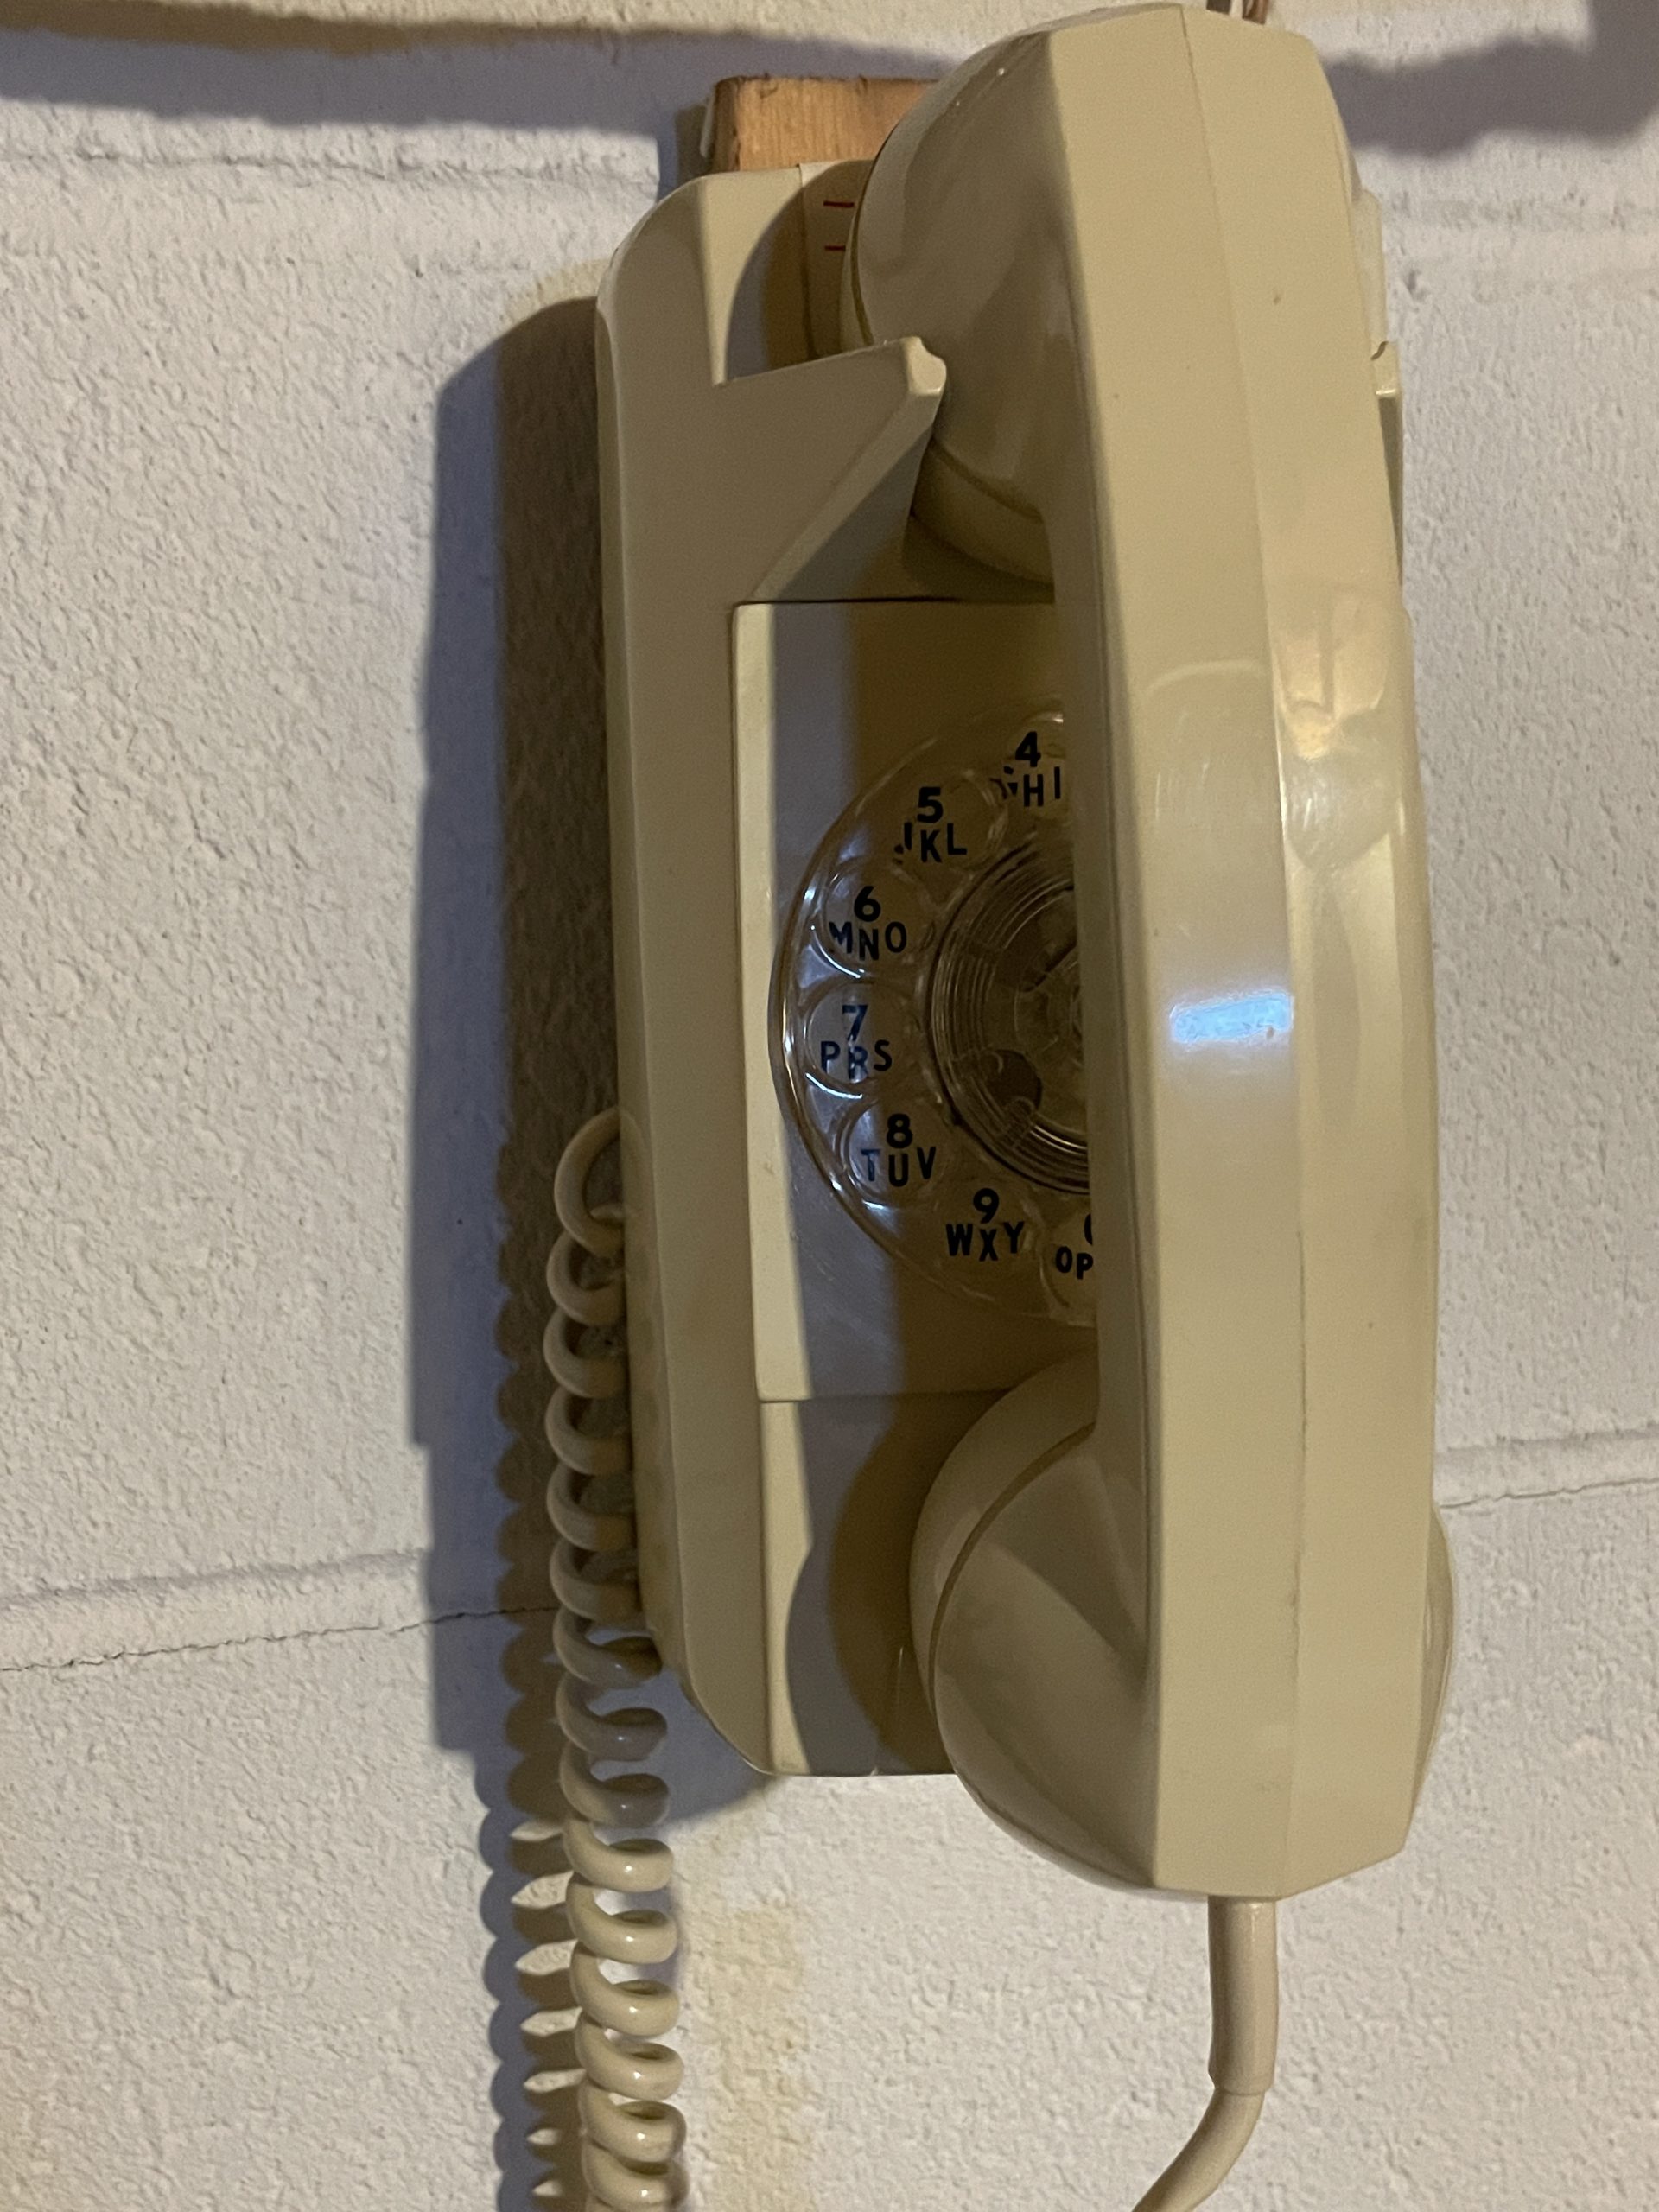 Parting with an Old Friend—The Landline